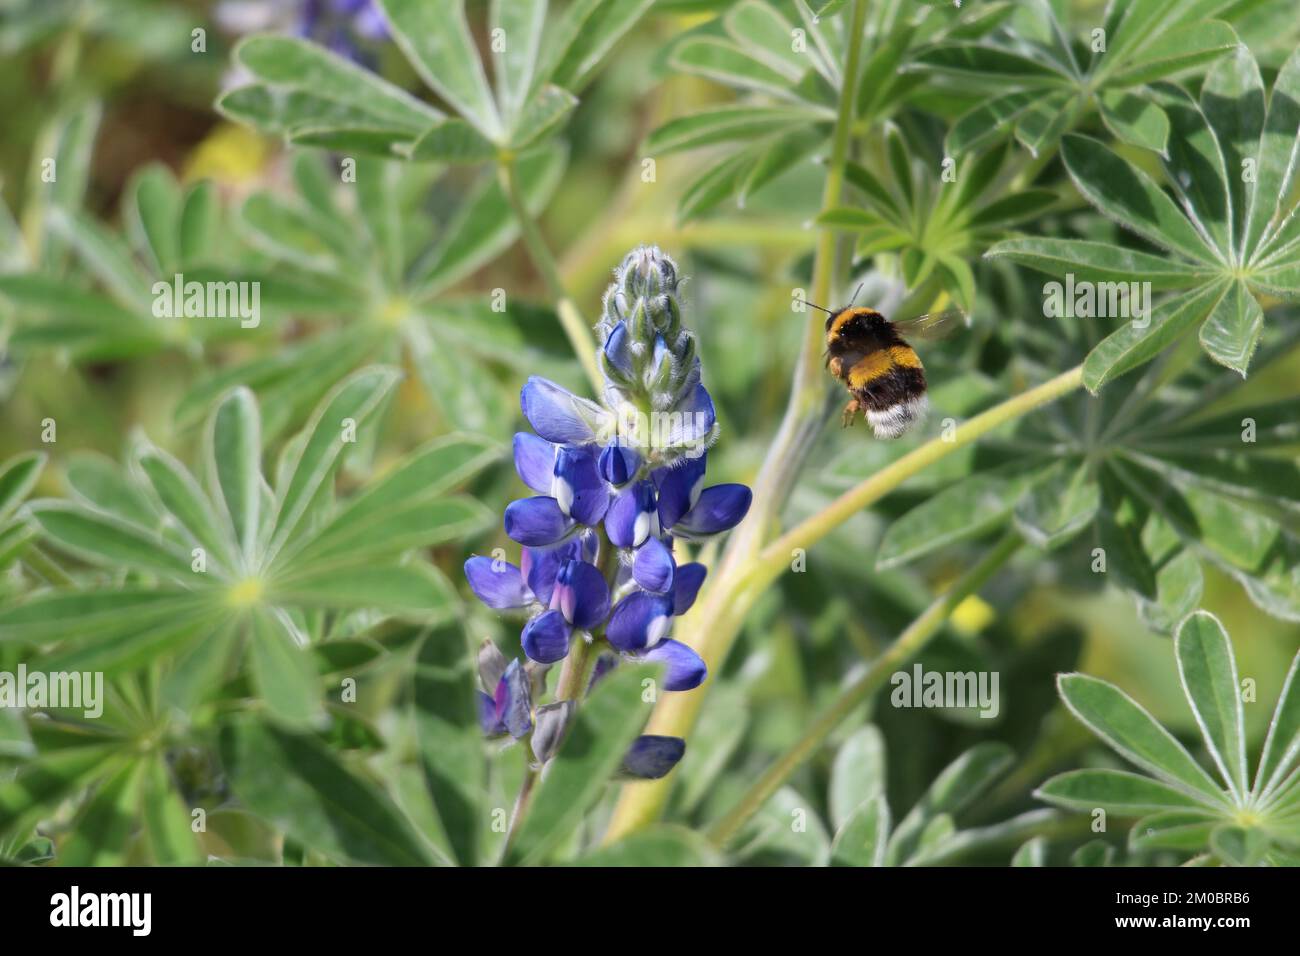 Close-up of a bumblebee (Bombus terrestris) flying near a wild Lupine blue flower (Lupinus micranthus) with green background, Algarve region, Portugal Stock Photo